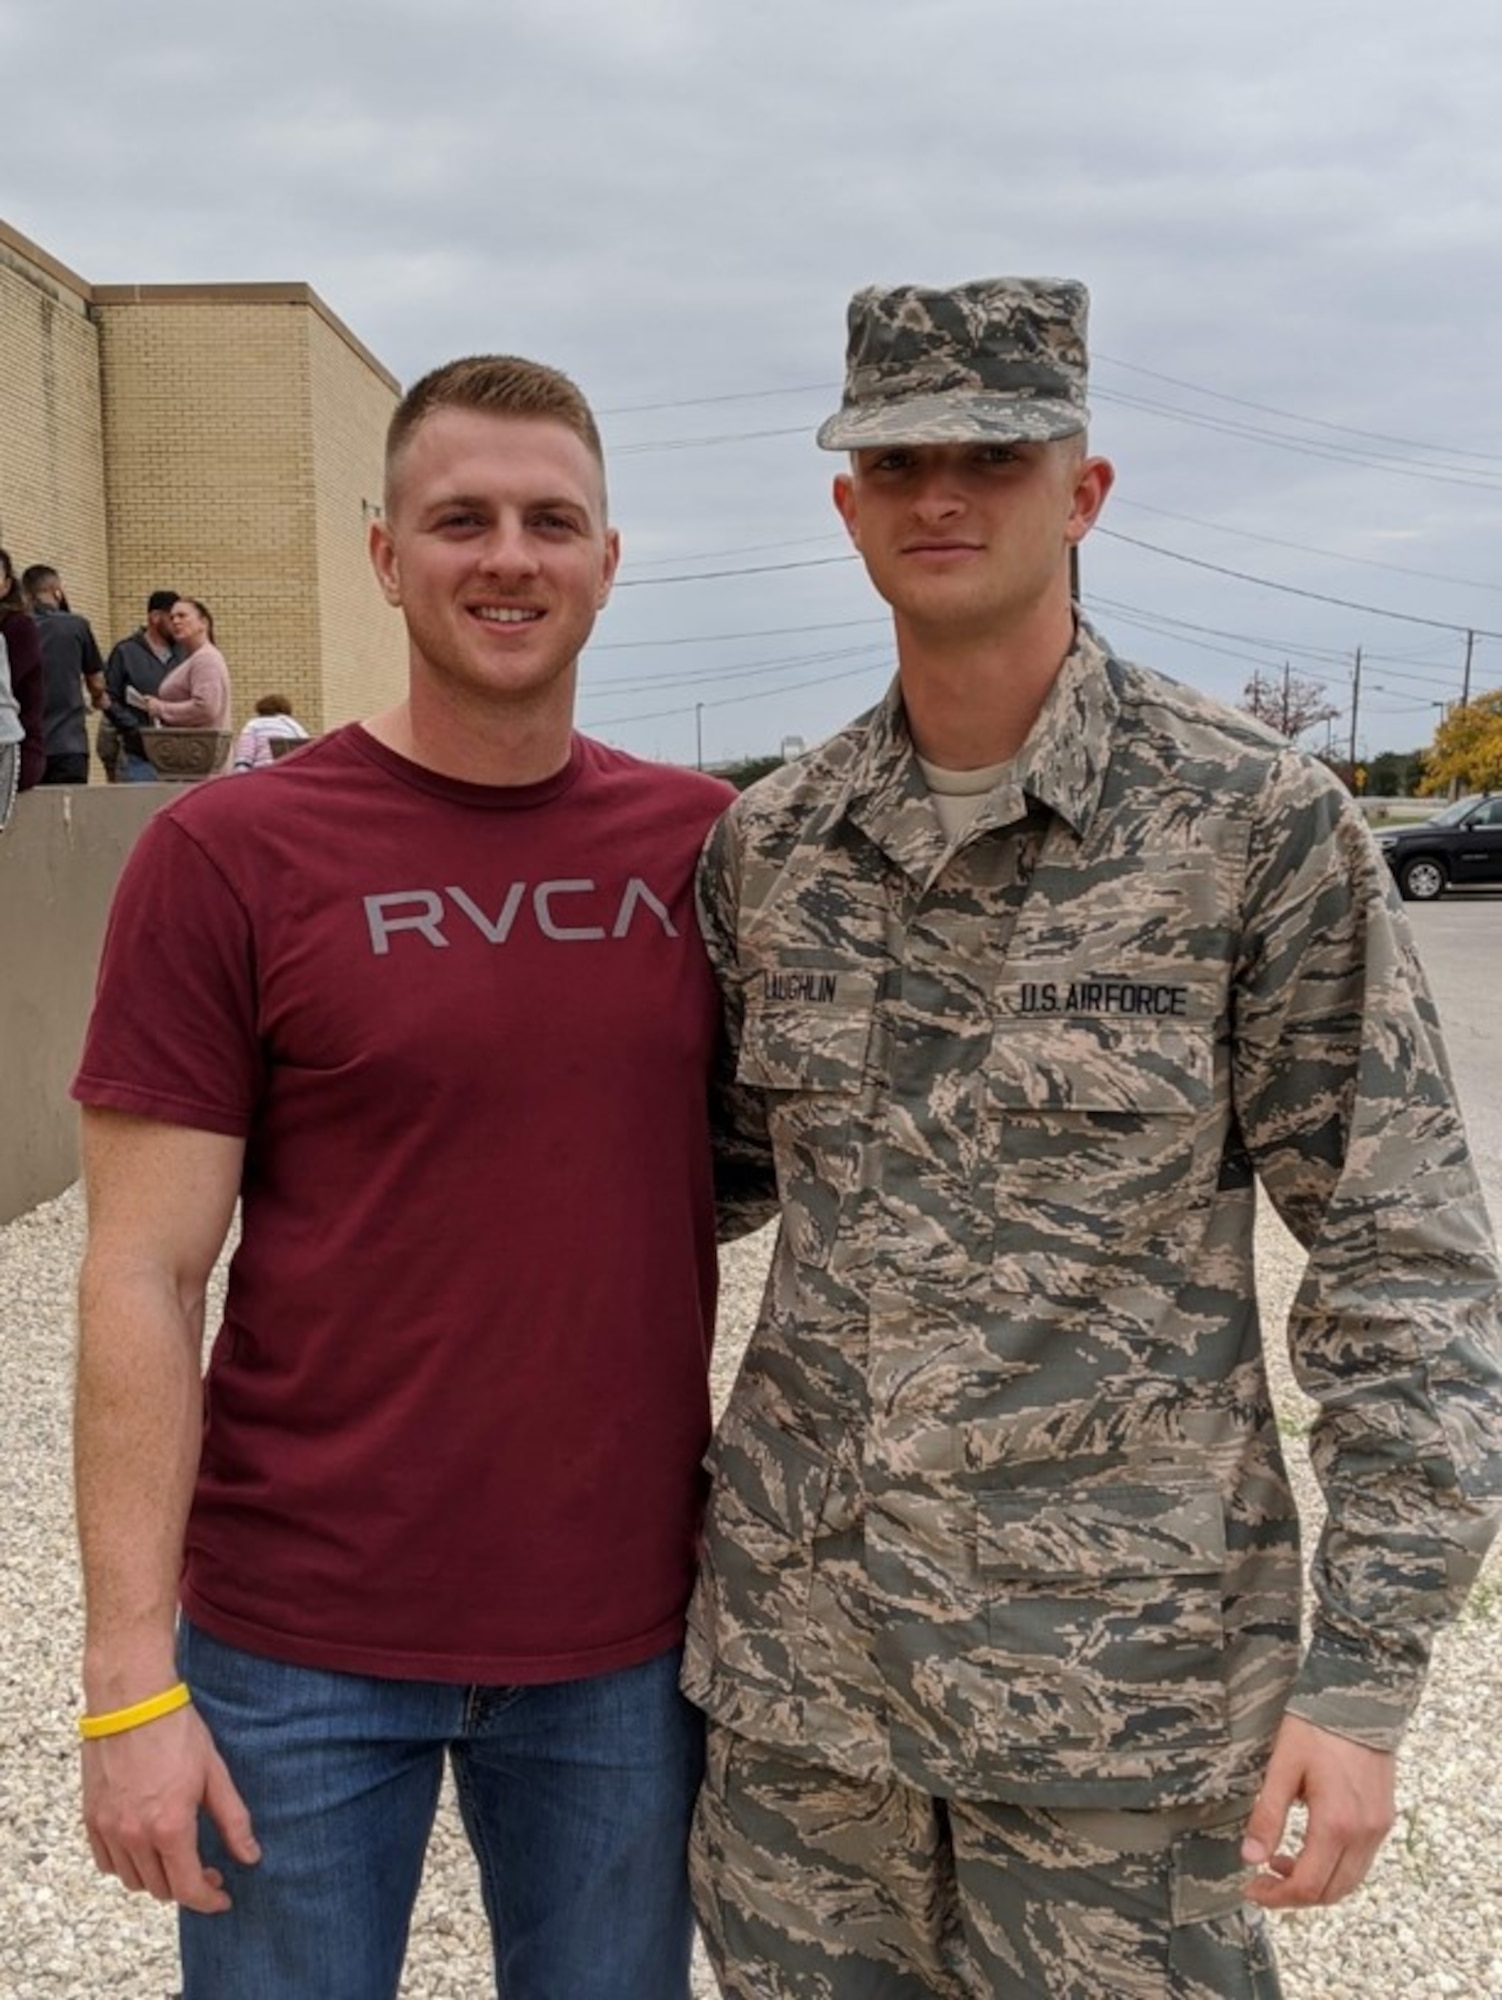 Airman 1st Class Justin Laughlin, right, poses with his brother Staff Sgt. Cody Laughlin.